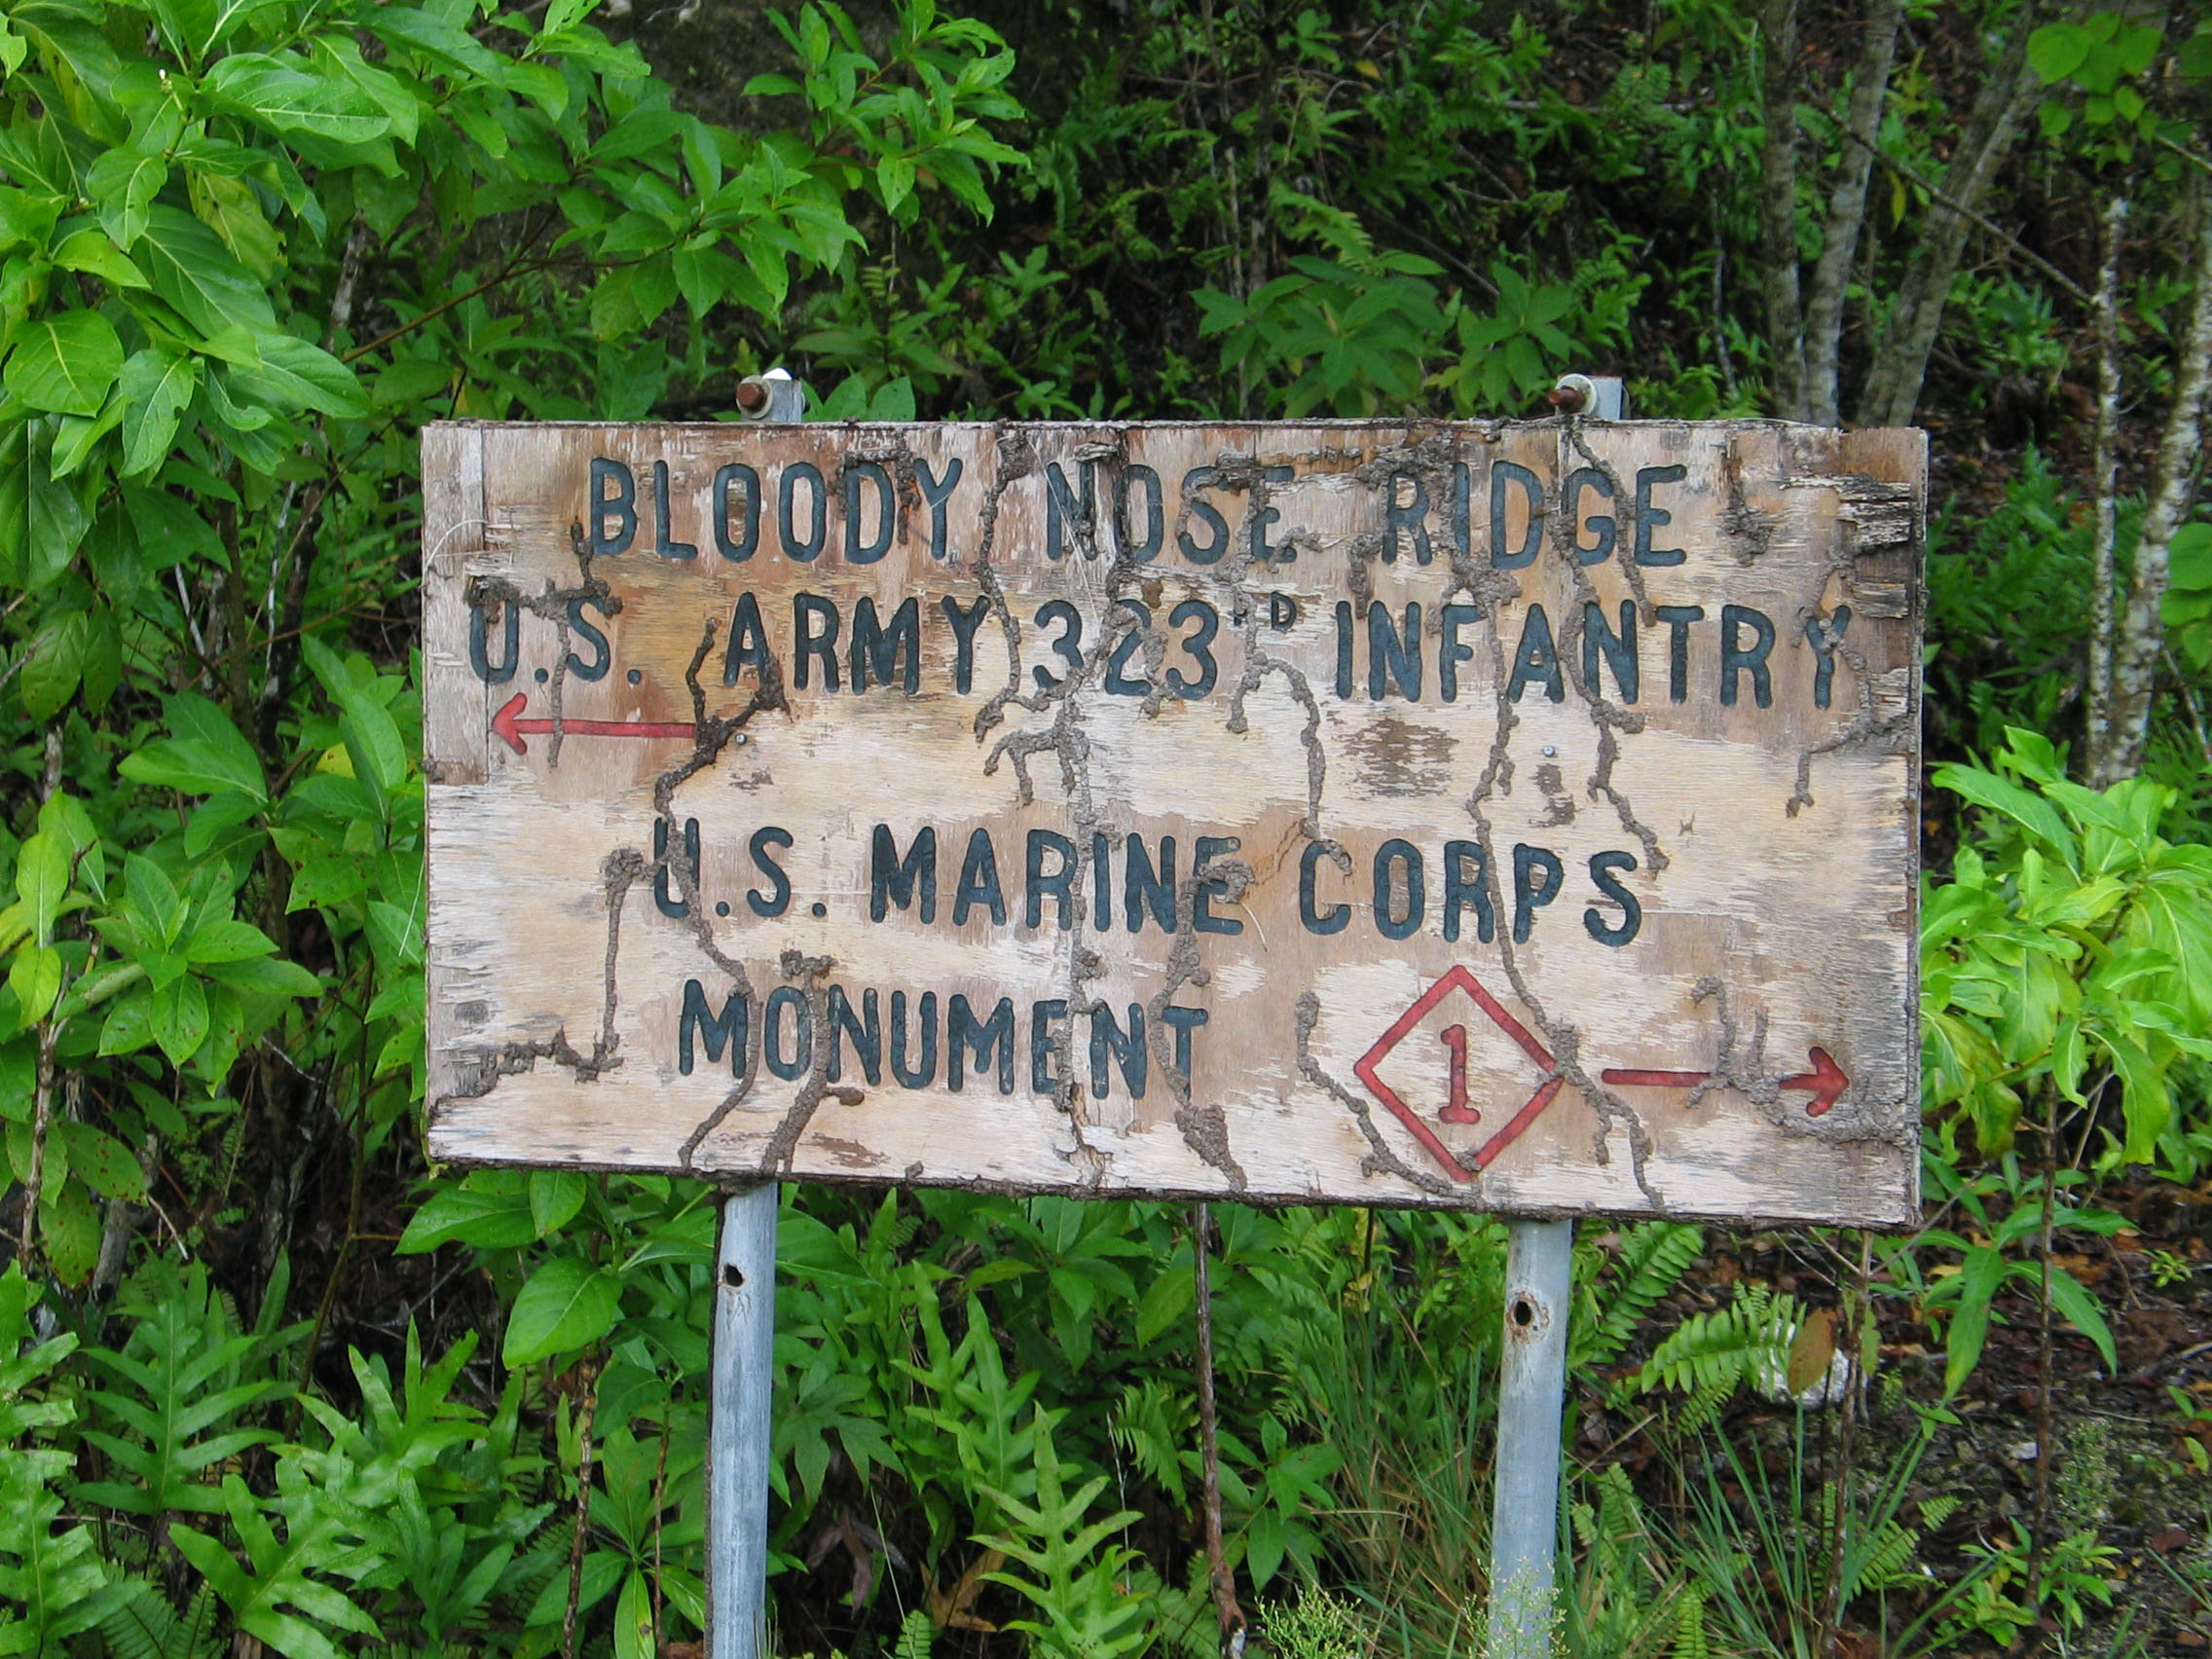 old looking sign that says bloody nose ridge